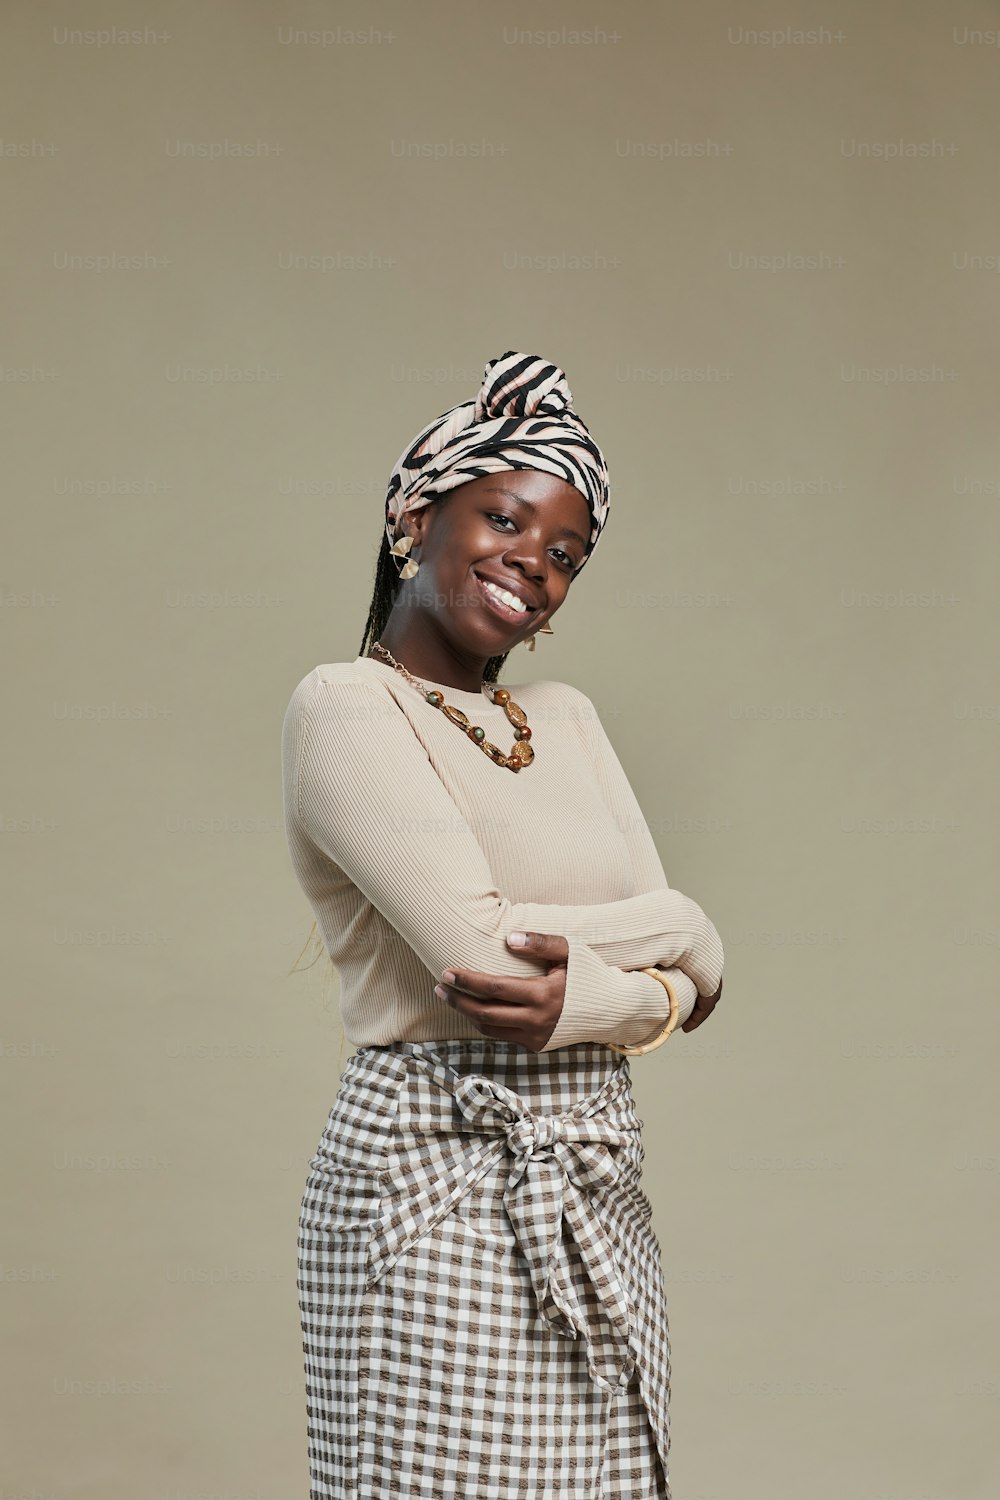 Vertical portrait of young African-American woman wearing ethnic style and smiling at camera while posing against neutral beige background in studio